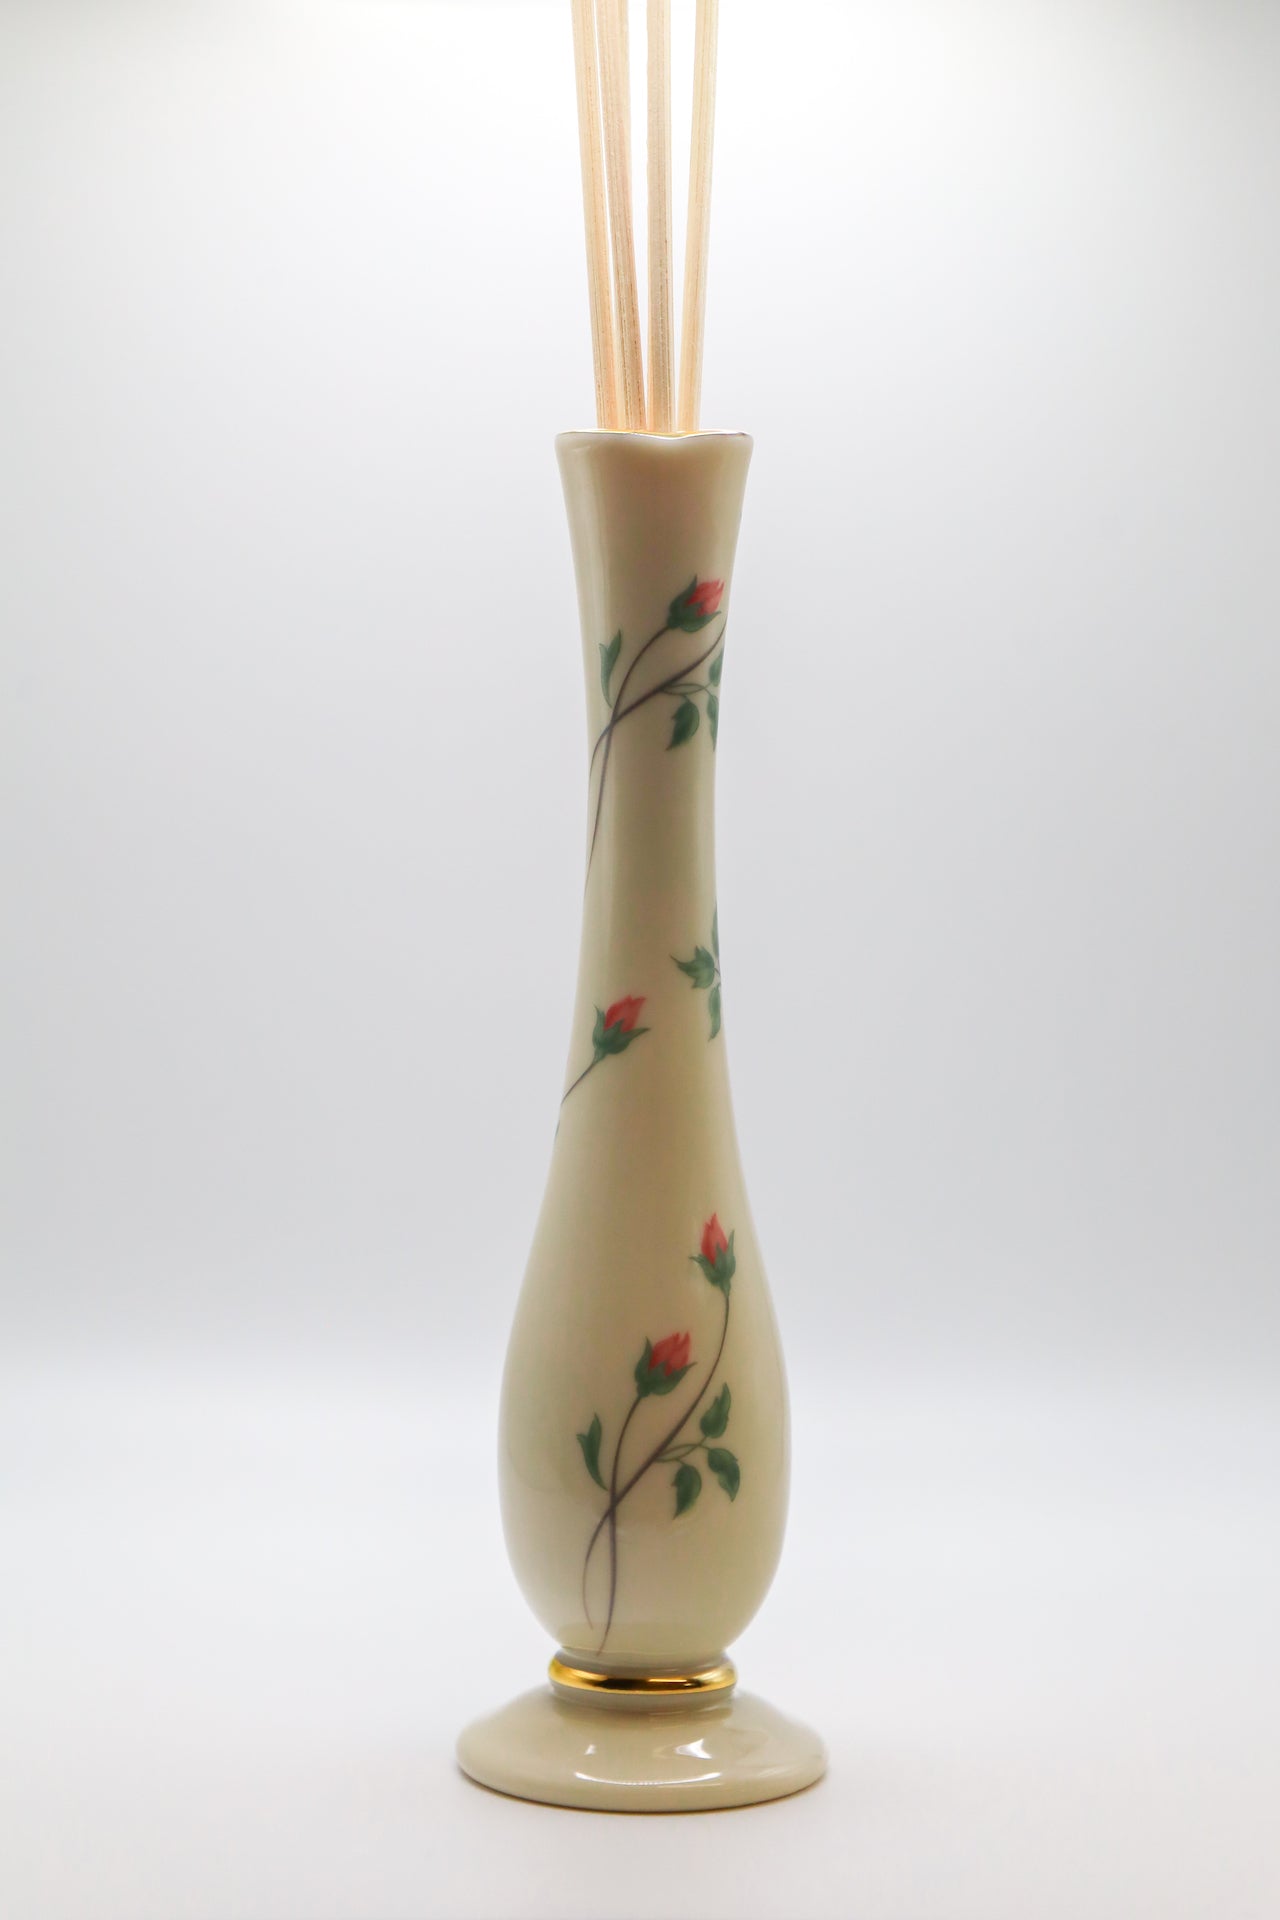 Rose Manor Bud Vase by Lenox as scent diffuser